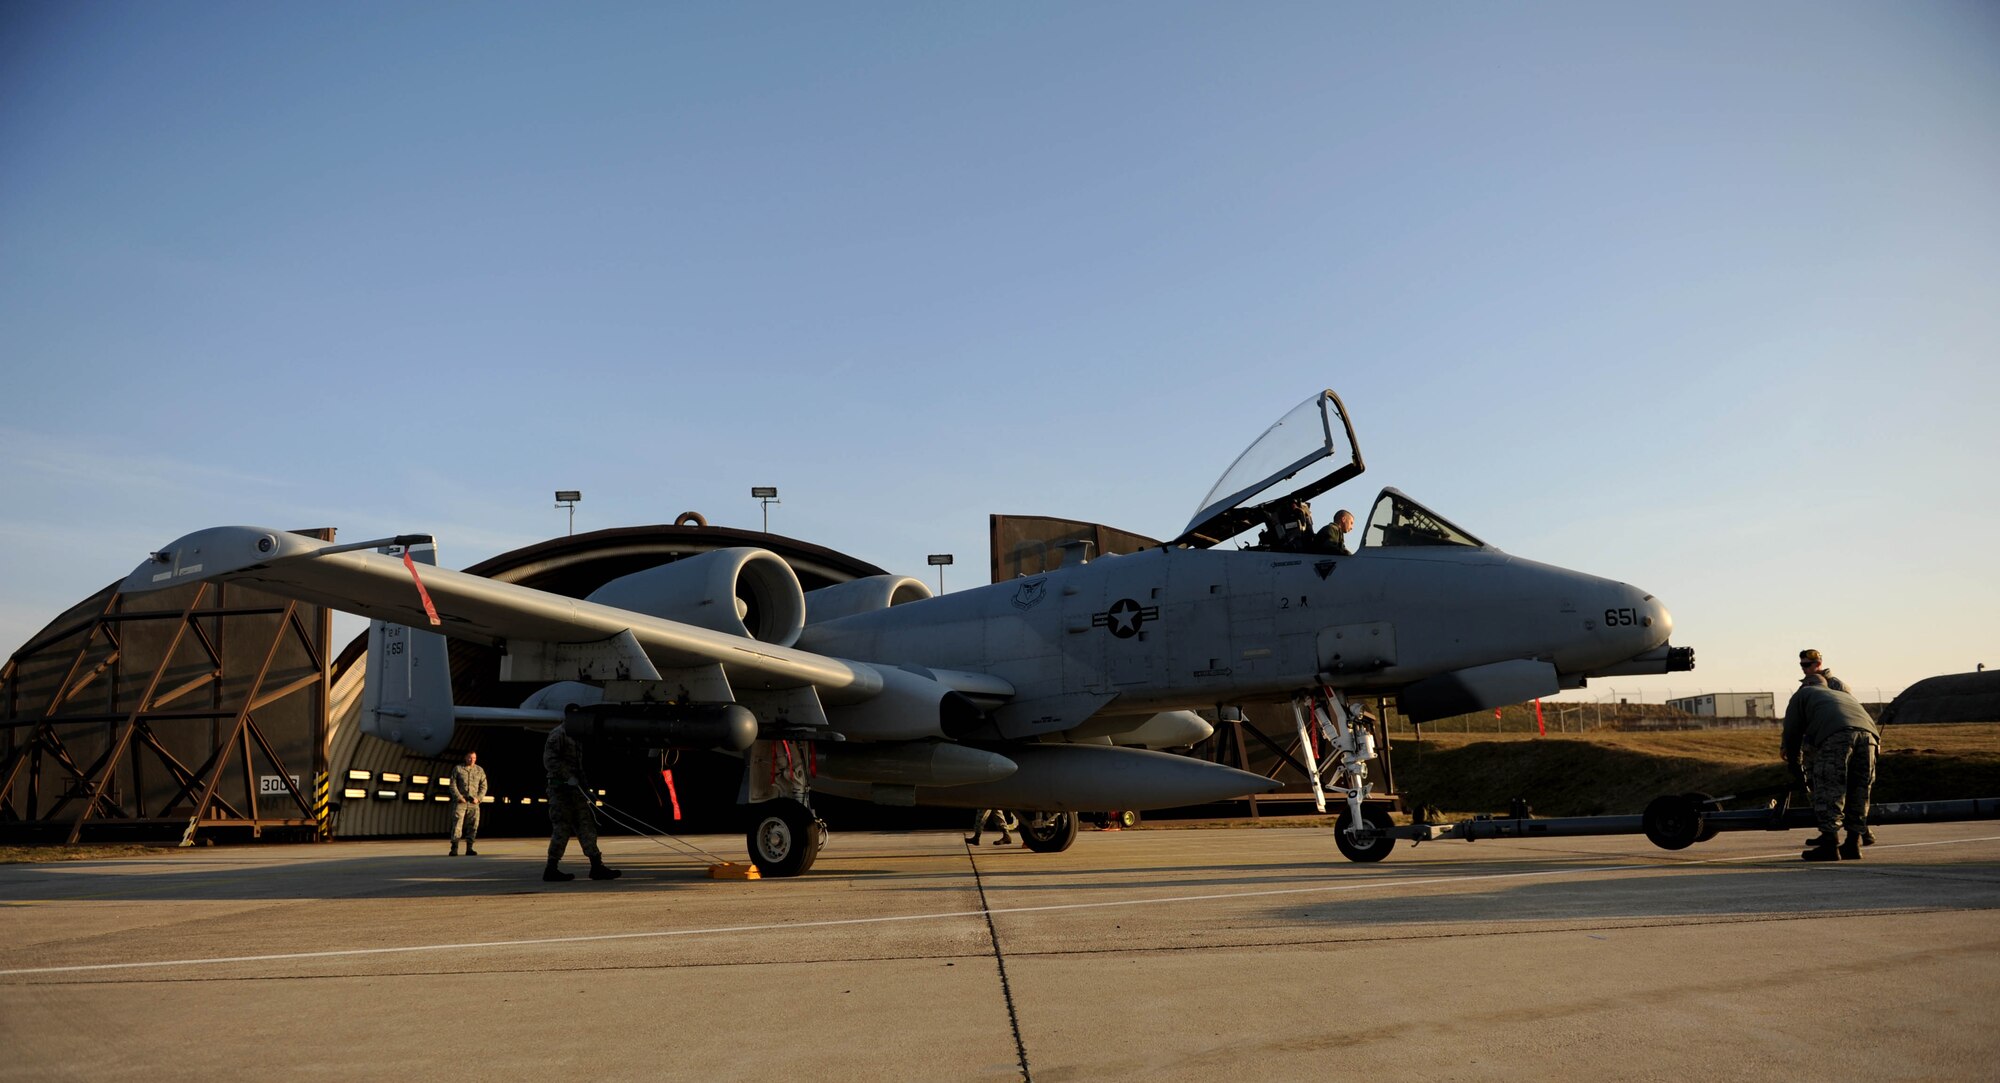 A group of U.S. Air Force maintainers assigned to the 354th Expeditionary Fighter Squadron put an A-10 Thunderbolt II aircraft into a hardened aircraft shelter at Spangdahlem Air Base, Germany, Feb. 13, 2015. The A-10s deployed as part of a theater security package in support of Operation Atlantic Resolve. The unit will conduct training alongside NATO allies with the goal of strengthening interoperability and enhancing regional security in Germany. (U.S. Air Force photo by Airman 1st Class Timothy Kim/Released)